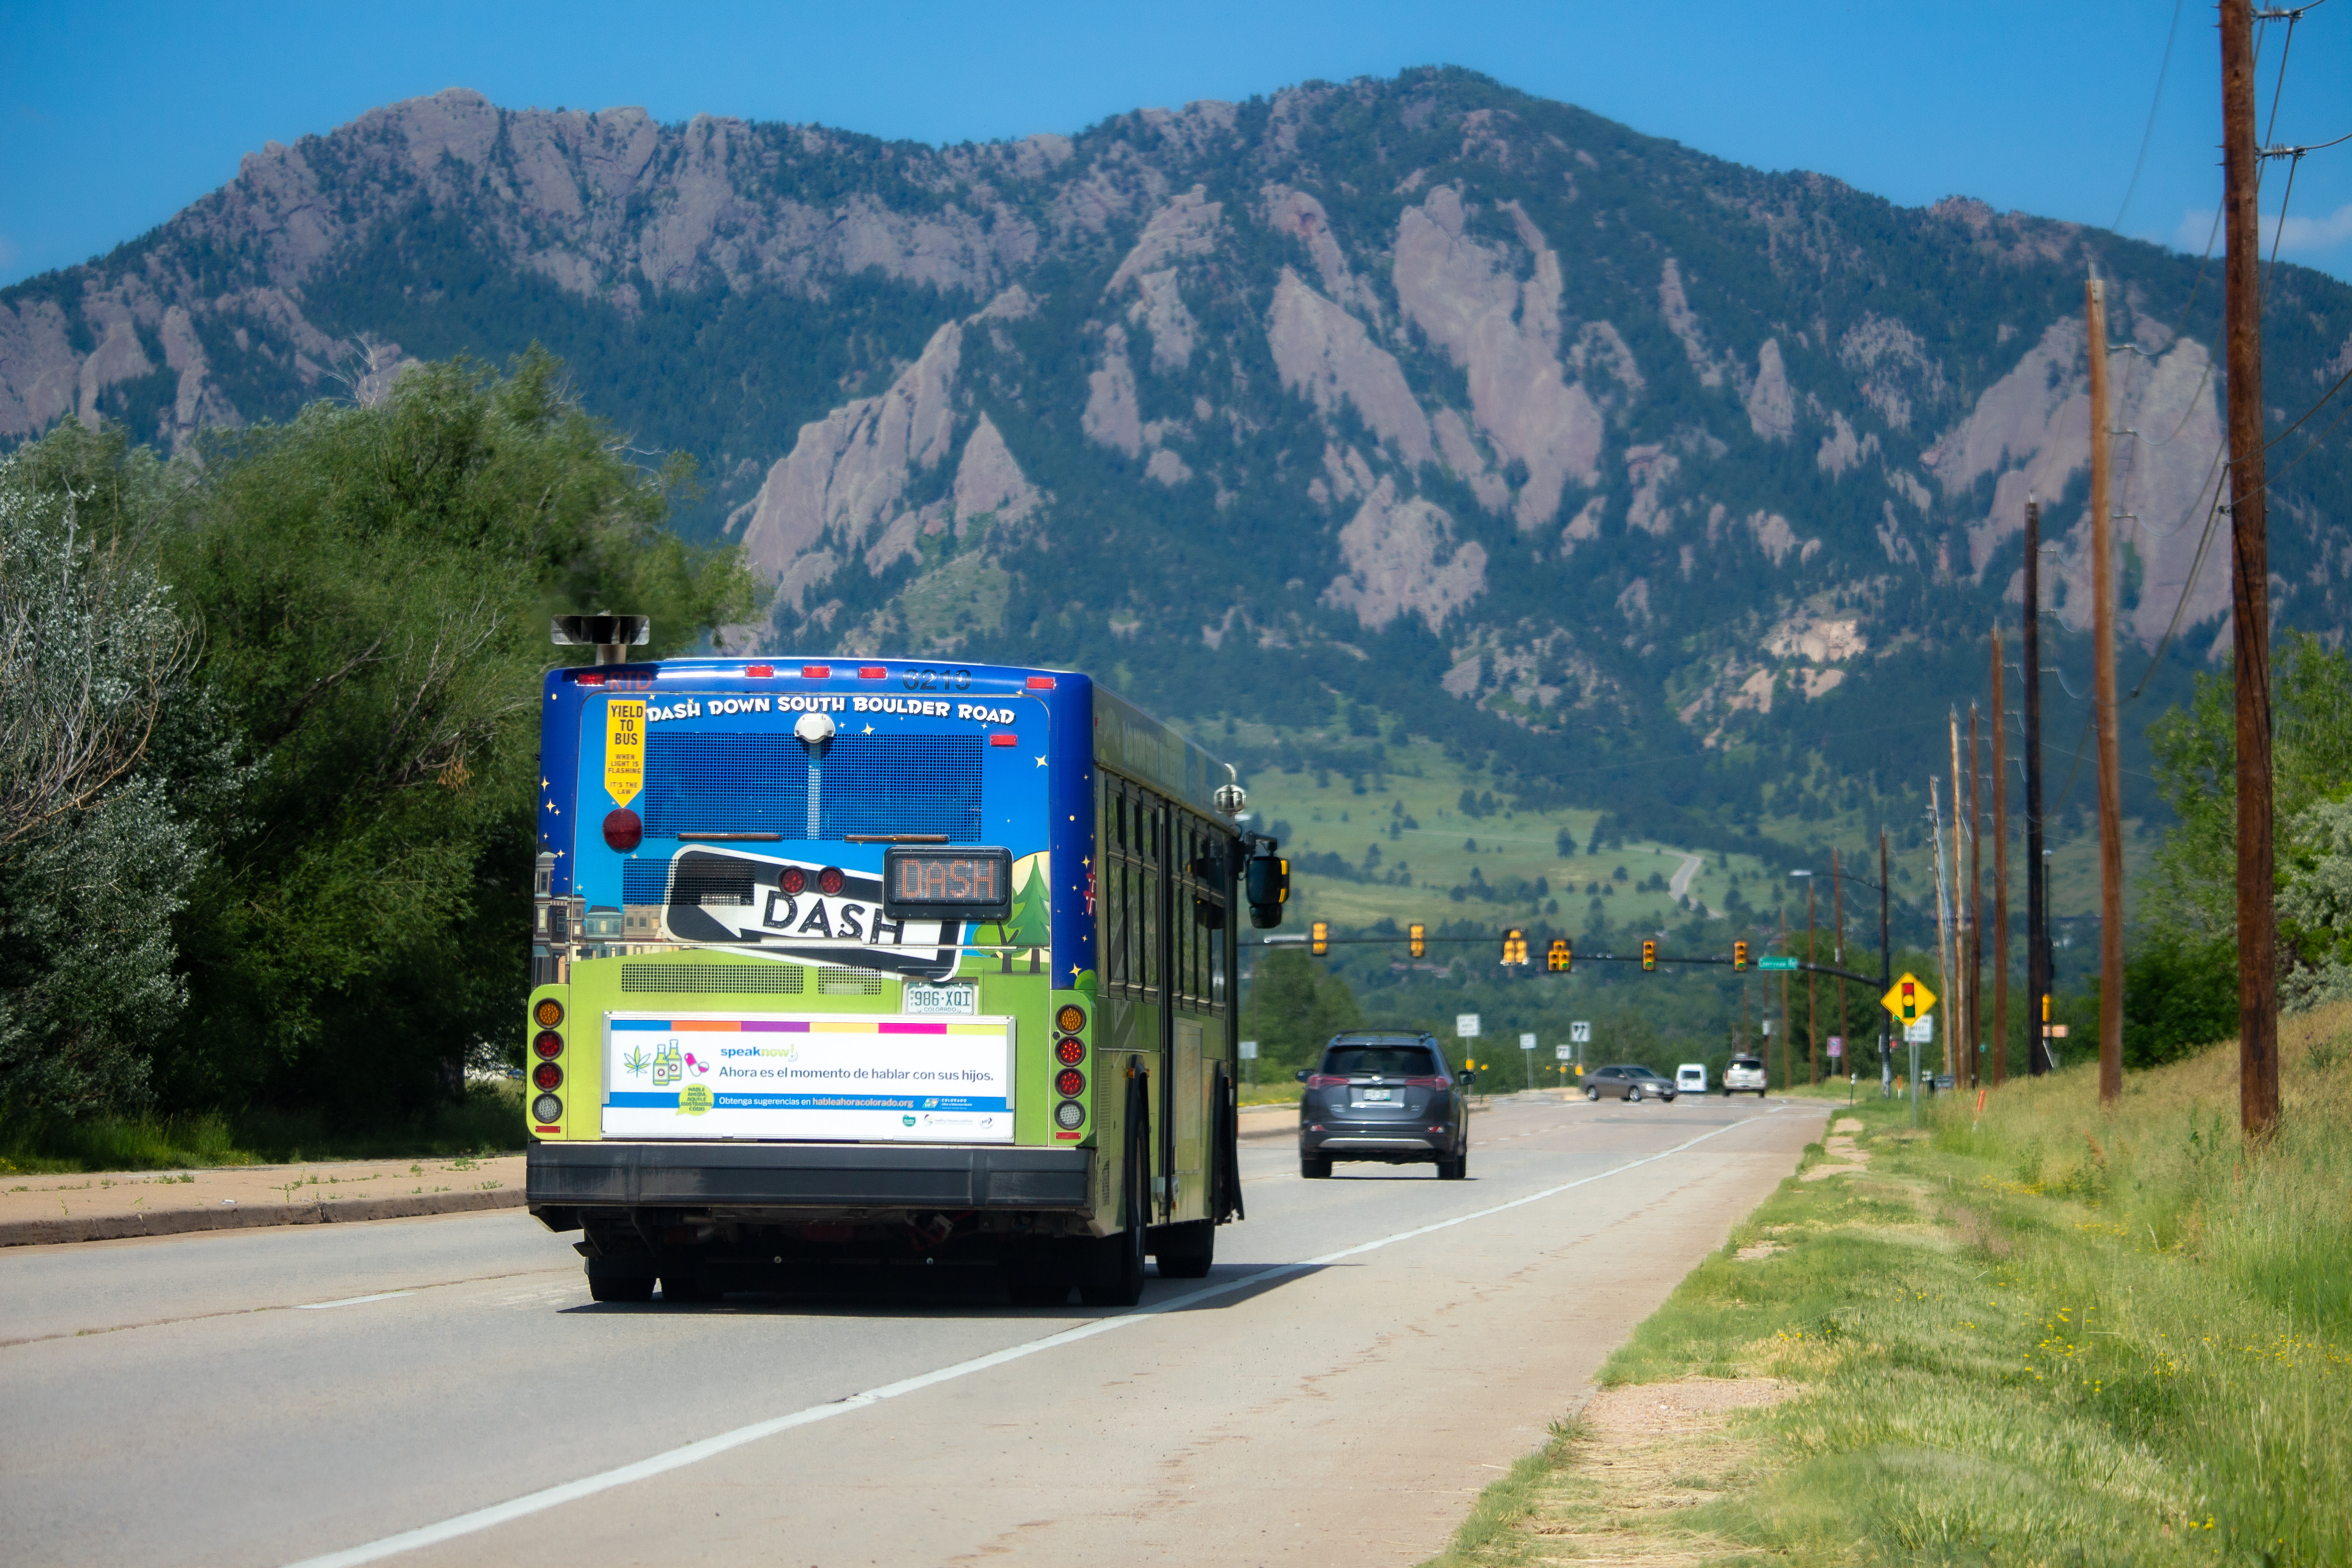 Dash City bus on South Boulder Road with Flatirons in background